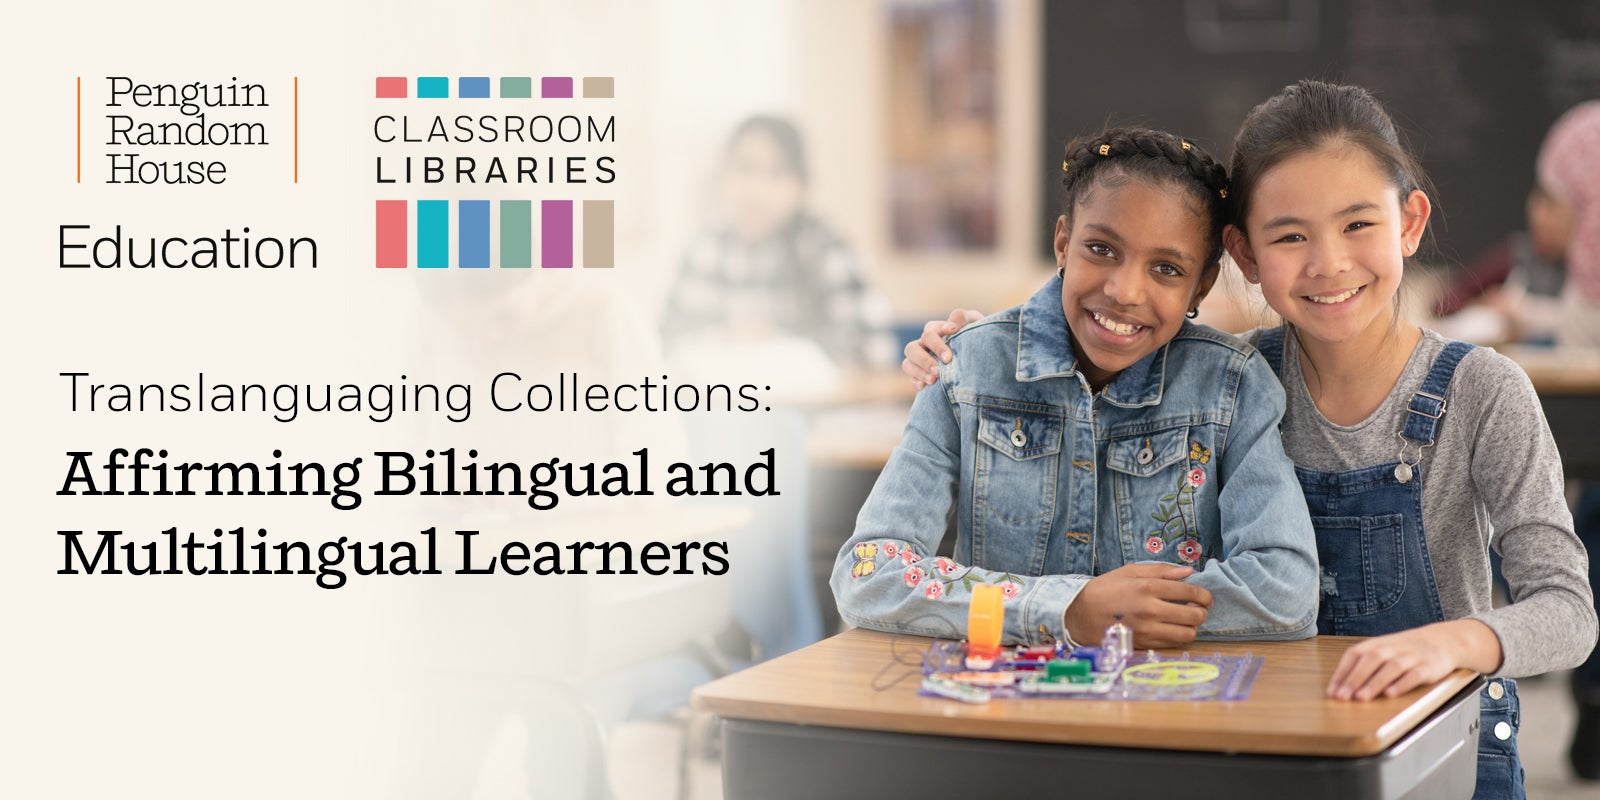 education translanguaging collections affirming bilingual and multilingual learners